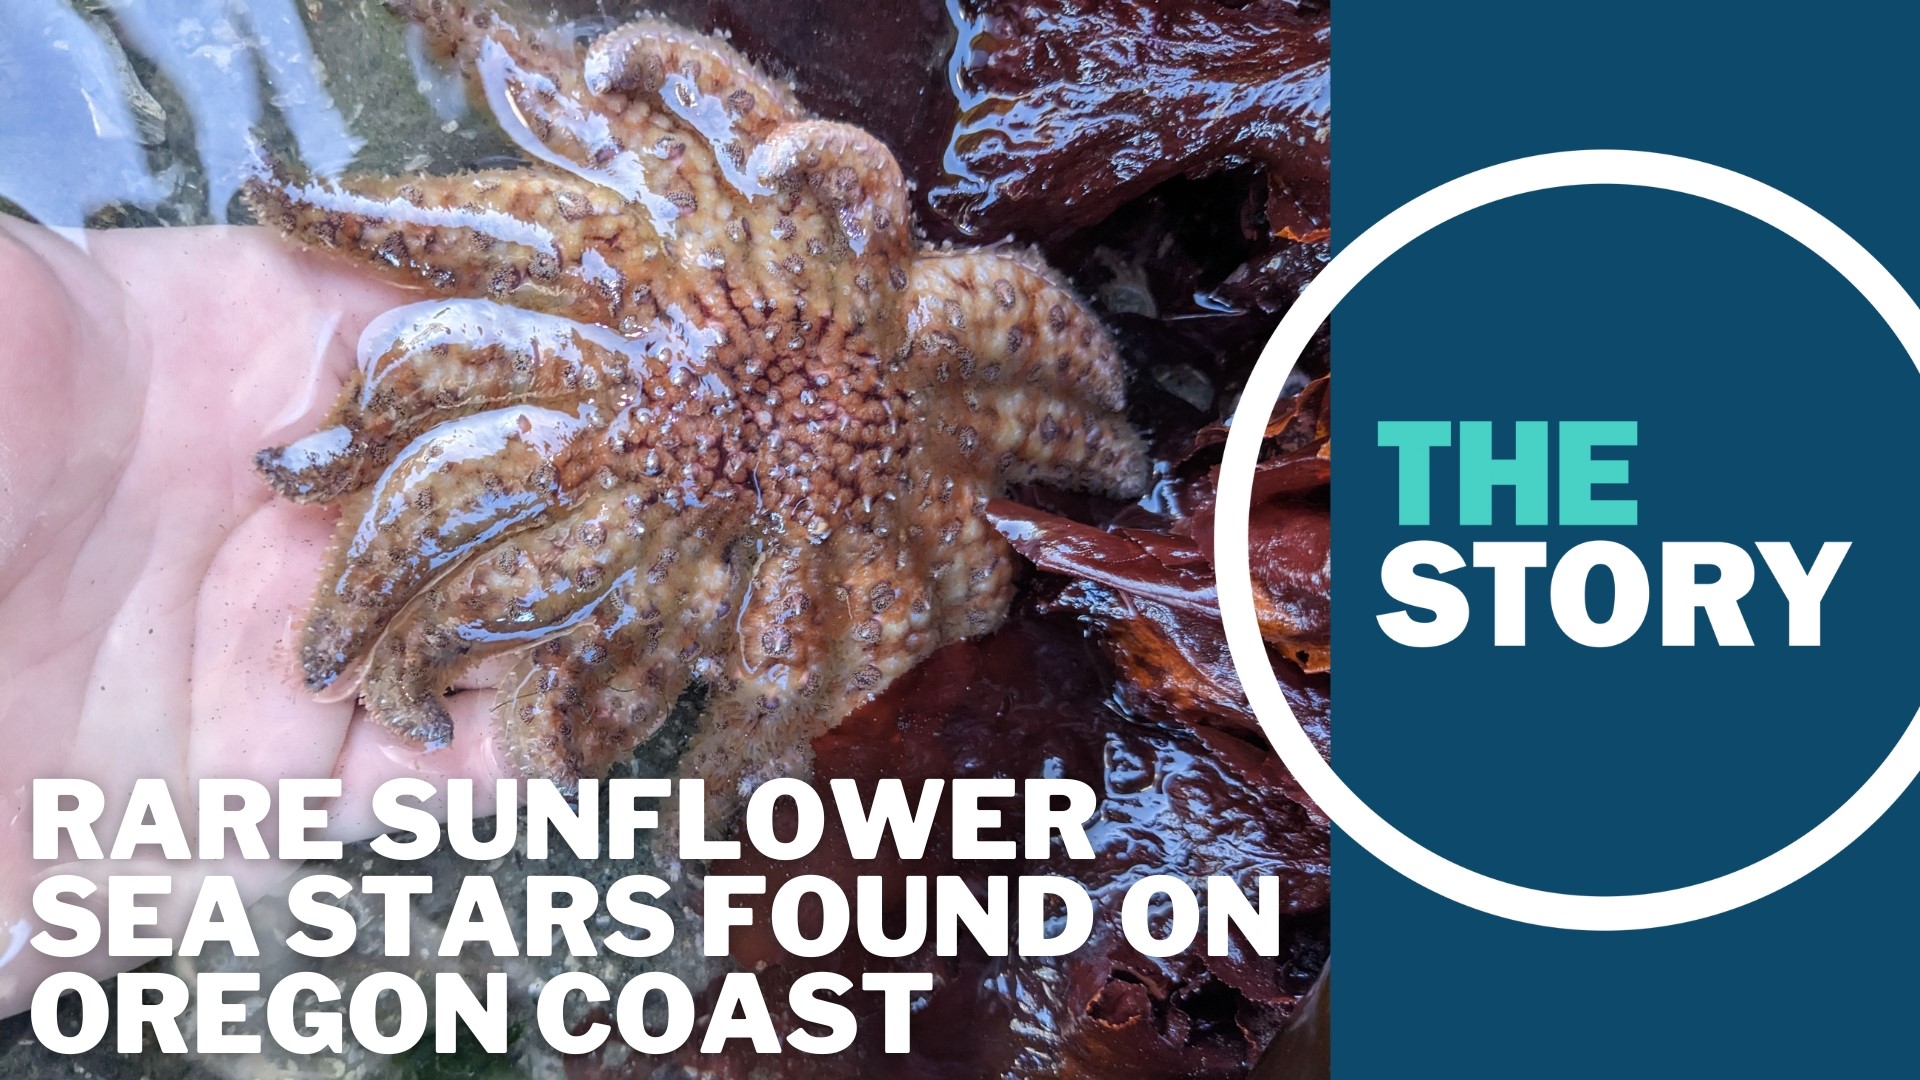 The Oregon Coast Aquarium staff documented one adult and 24 juvenile sunflower stars, the largest measuring just six inches across.